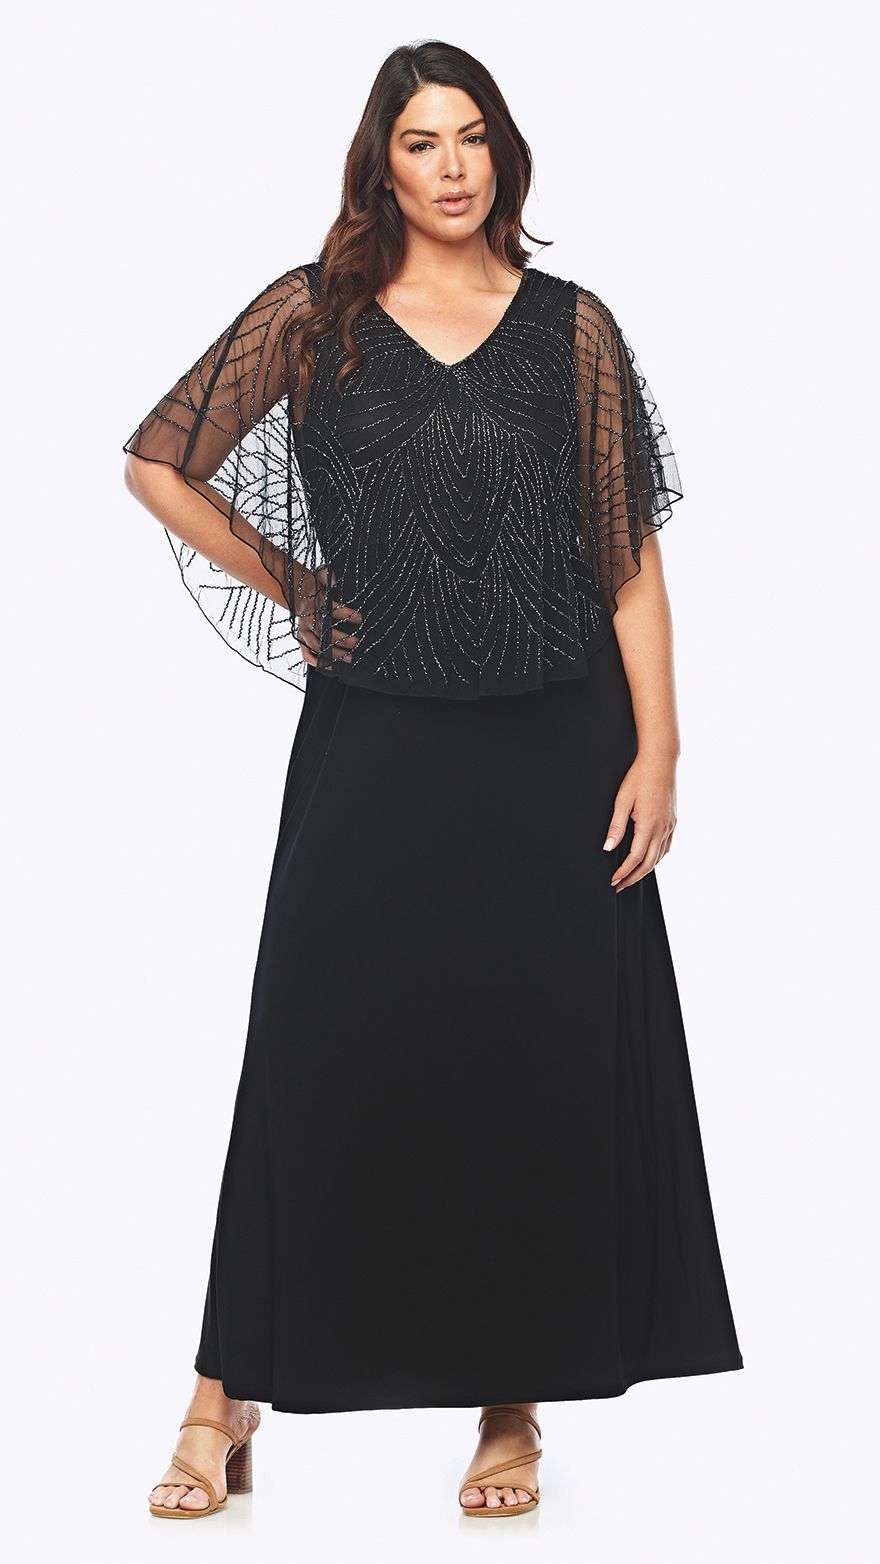 Long Stretch Dress with Beaded Cape.JPG